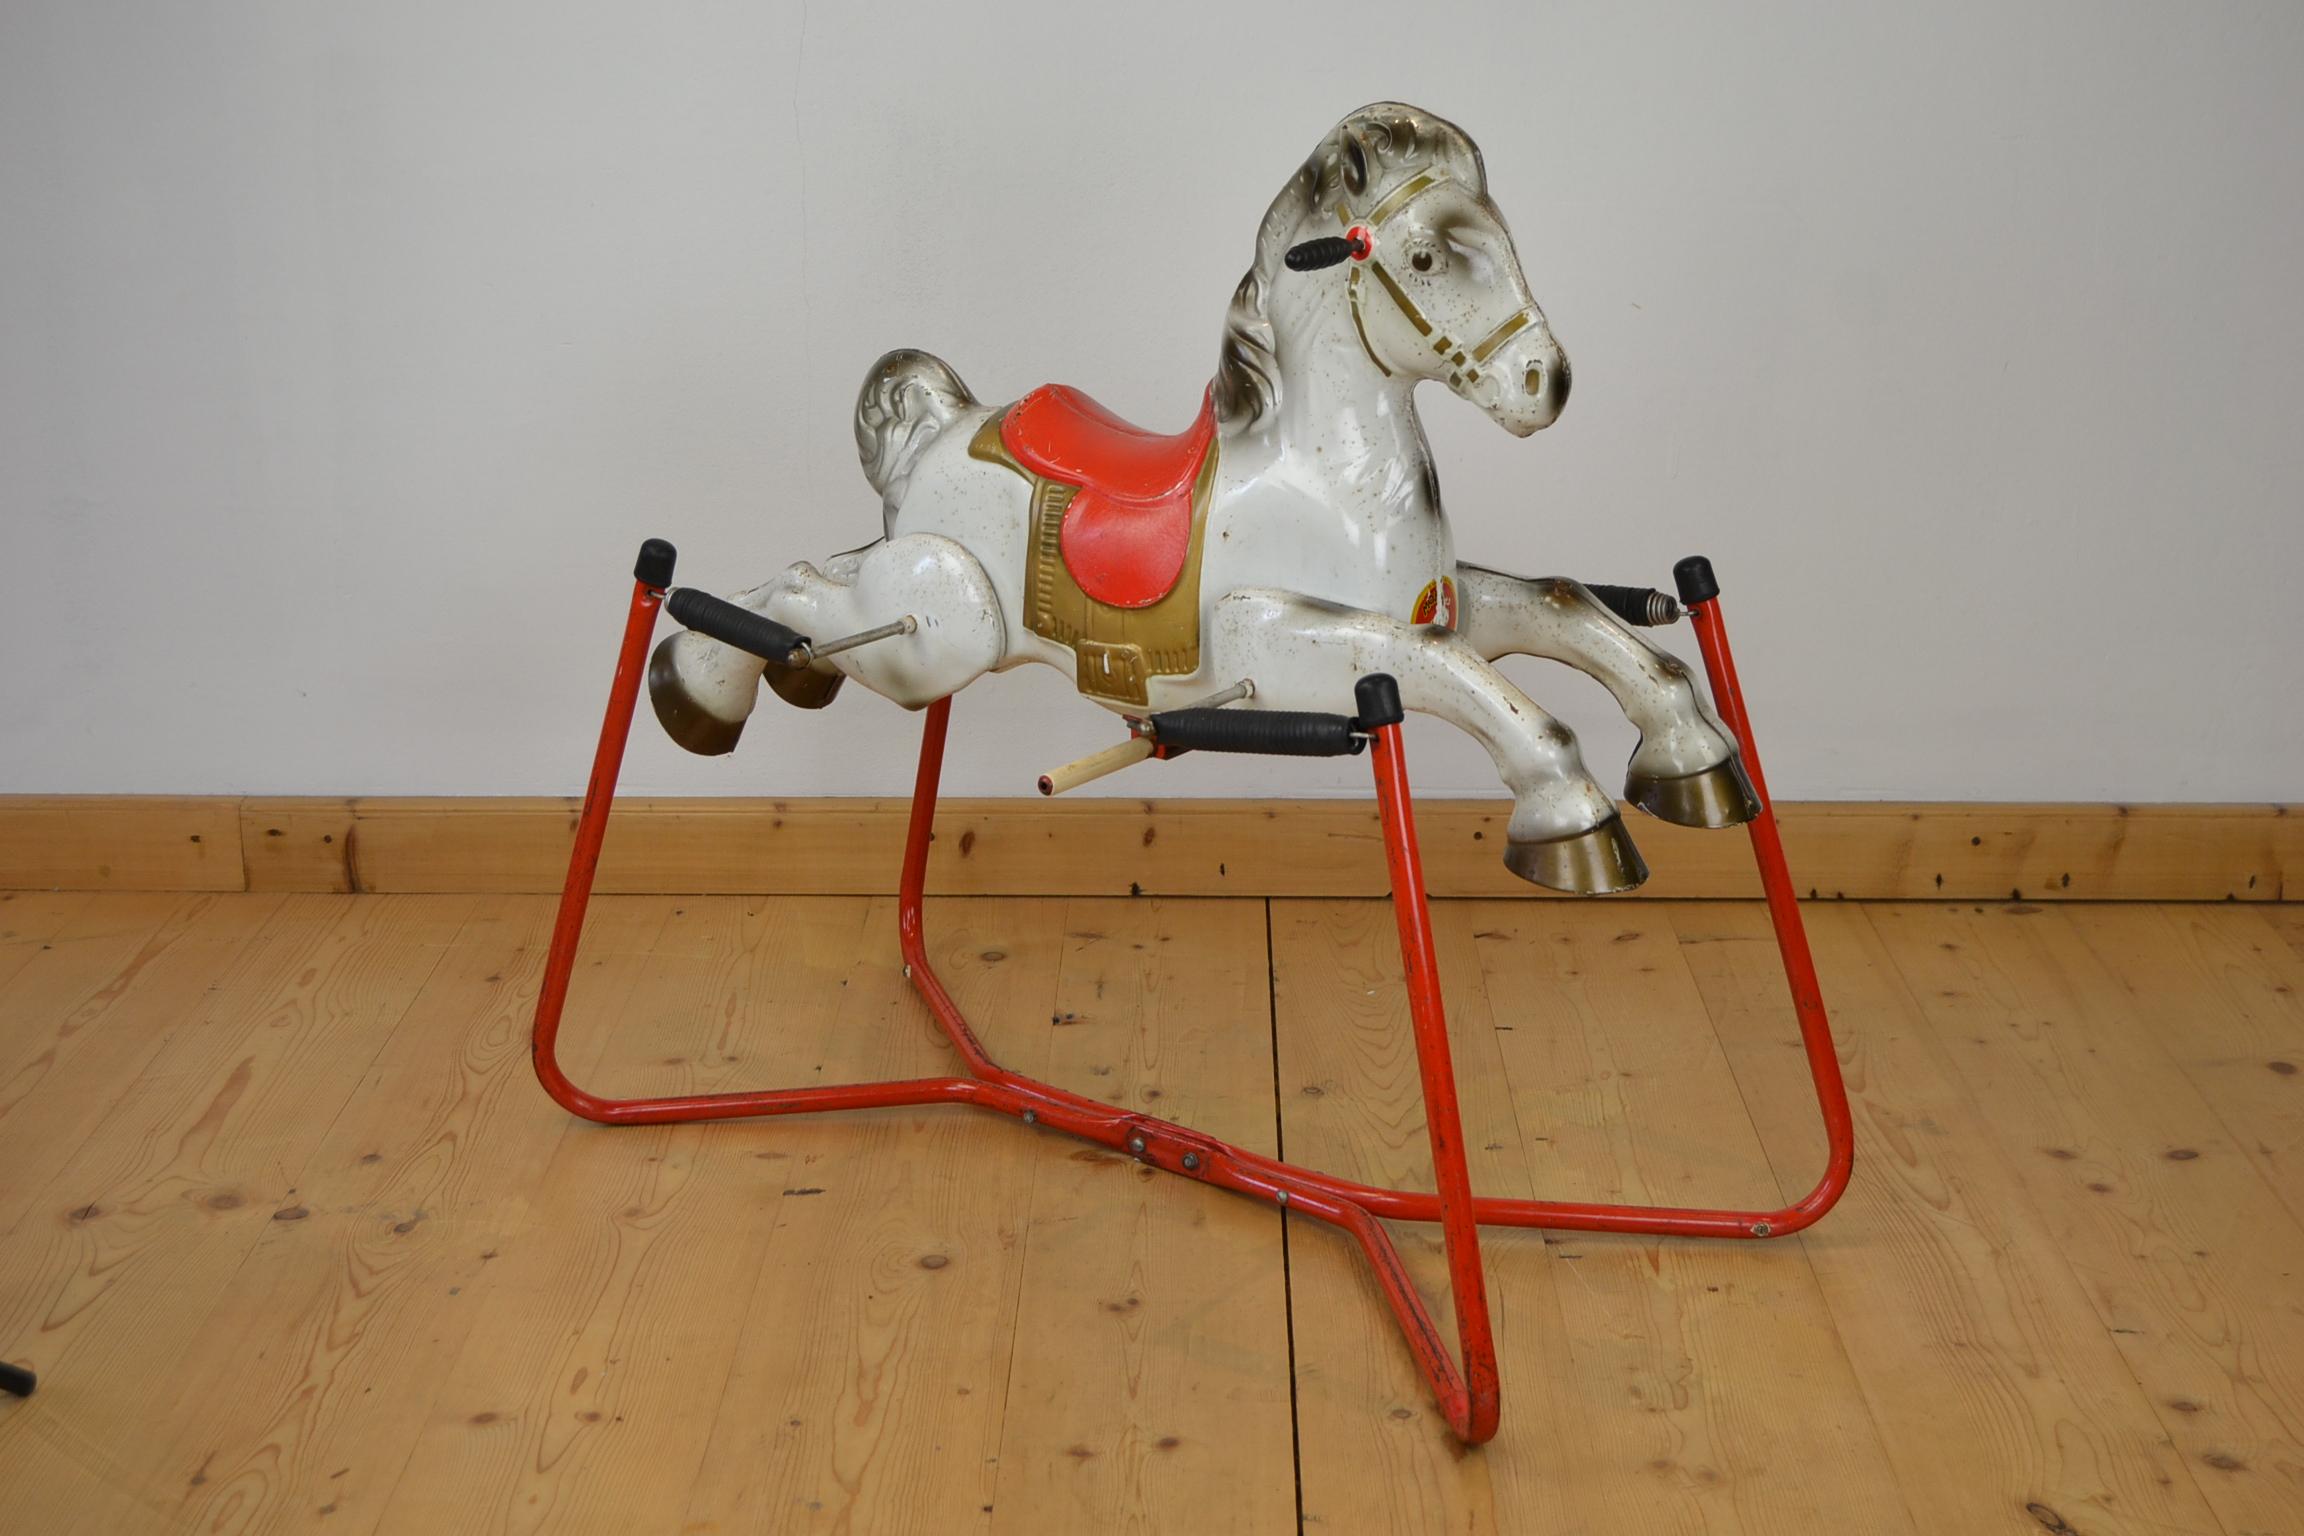 Mid-Century Modern Mobo Prairie King Rocking Horse Toy, England, 1960s For Sale